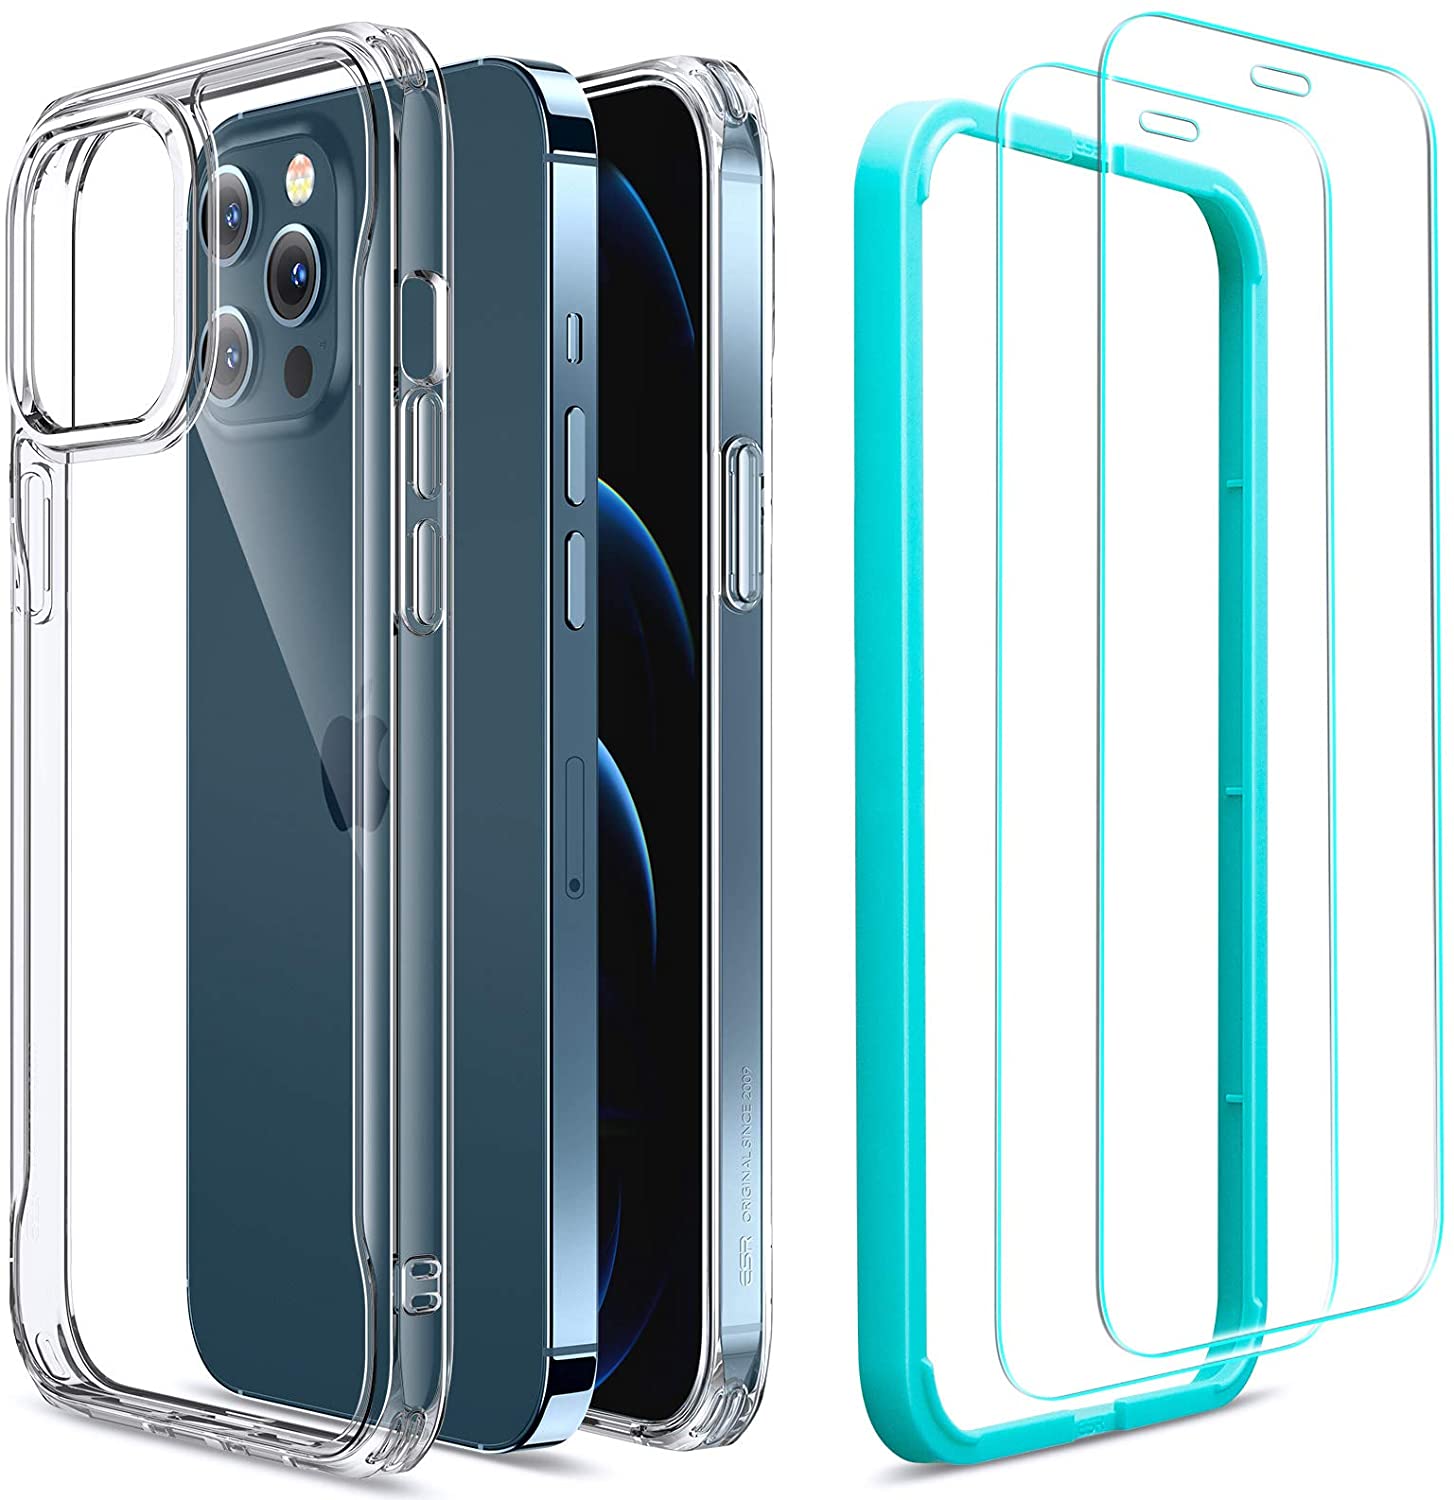 ESR Clear Cases with Screen Protector and More for iPhone 12/Mini/Pro/Pro Max & 13/Pro Max on Sale from $4.49 + Free Shipping w/ Prime or orders $25+